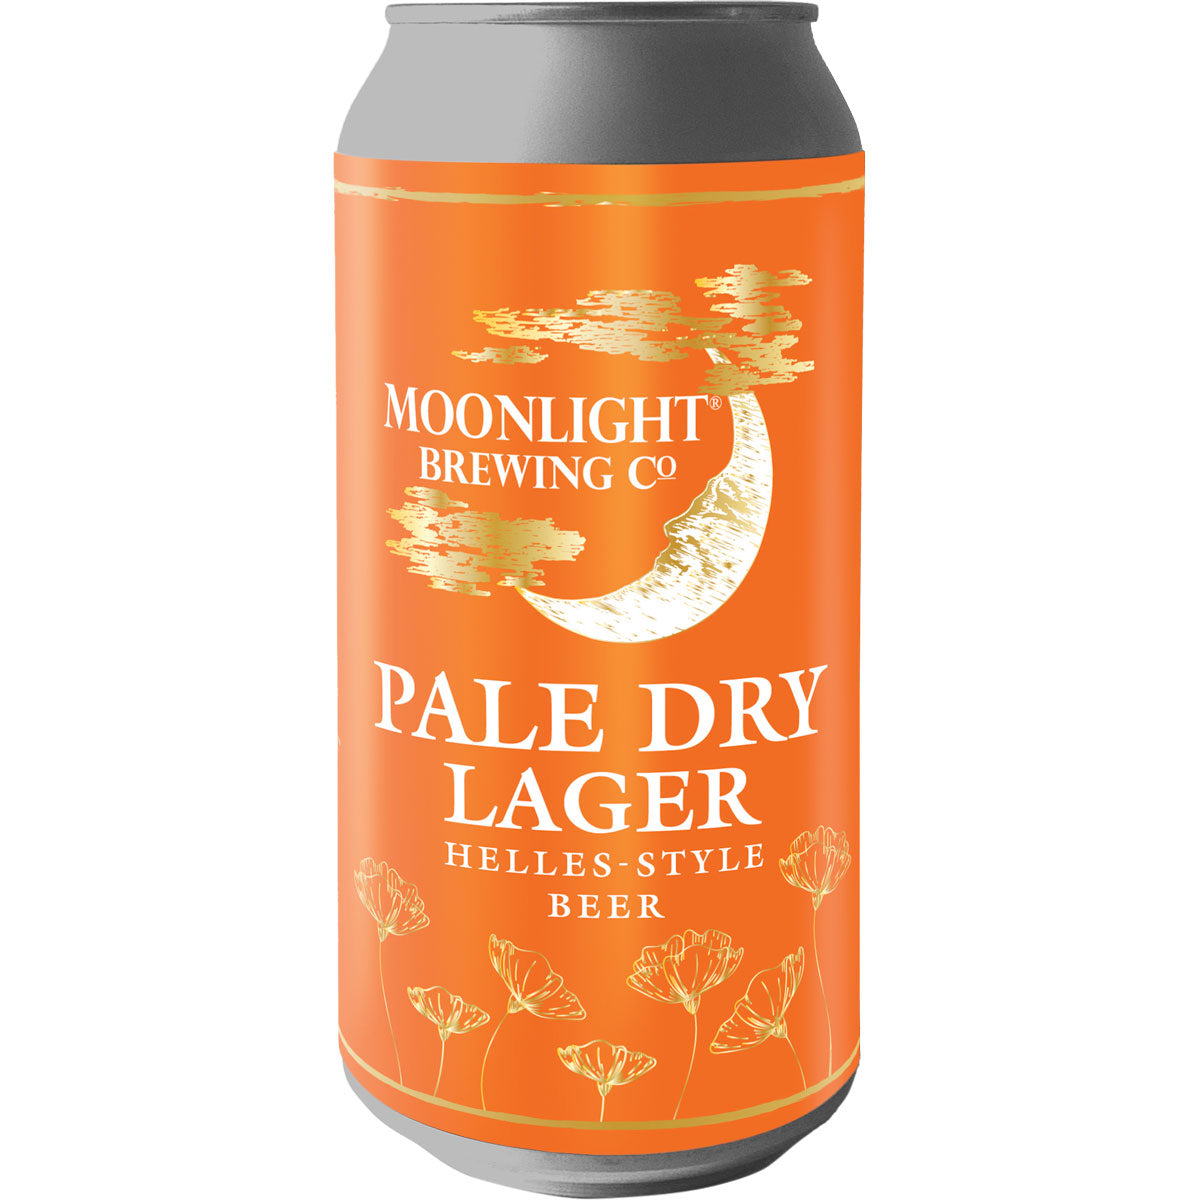 Can of Moonlight Brewing Pale Dry Lager Helles-Style Beer